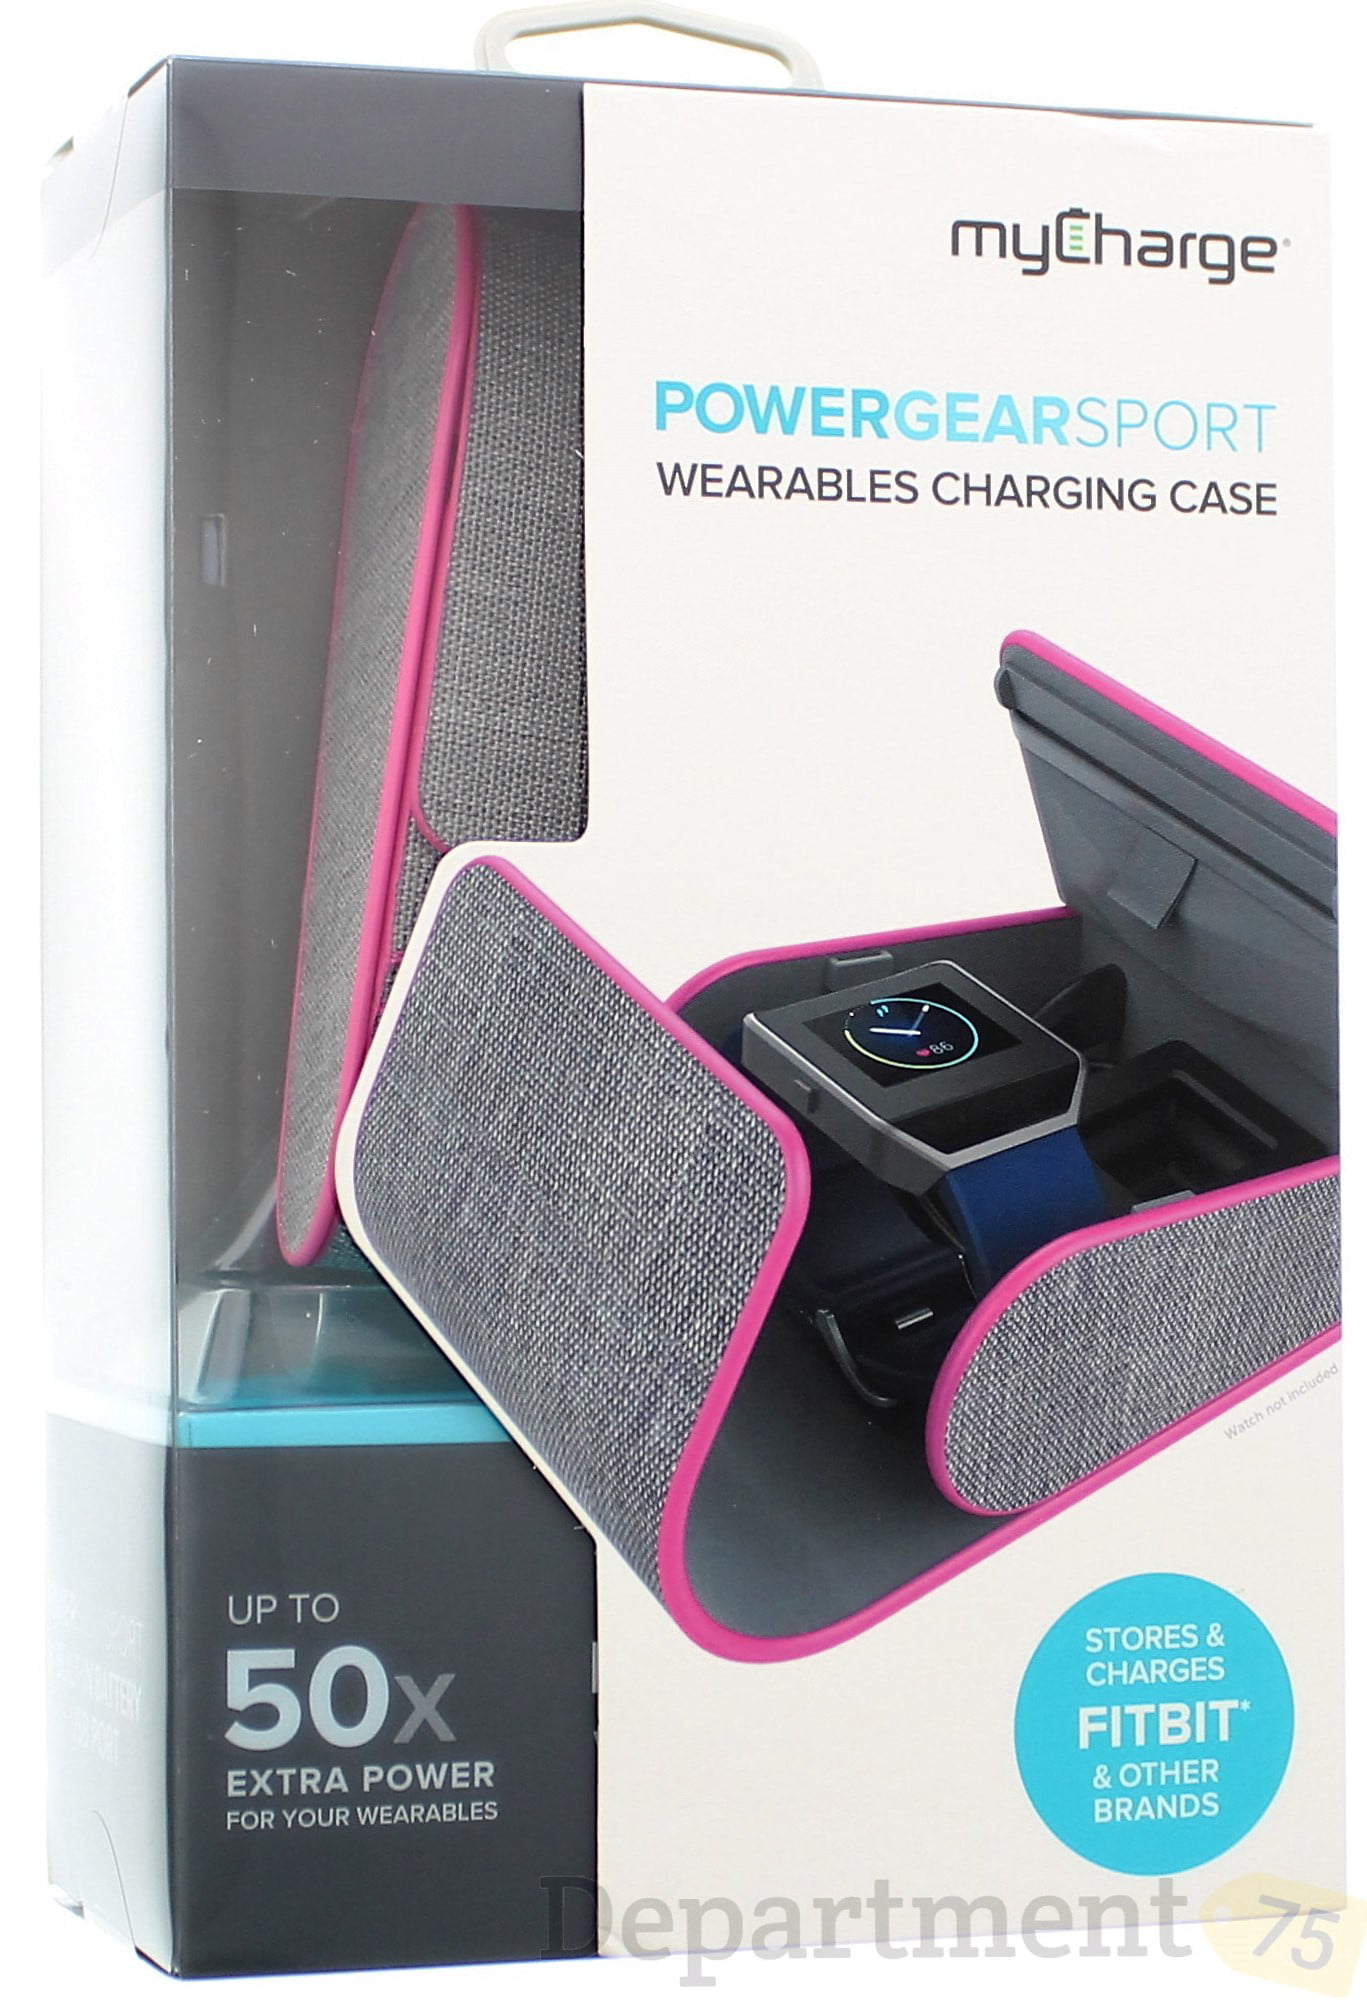 Details about   My charge wearable charging case power gear sport 